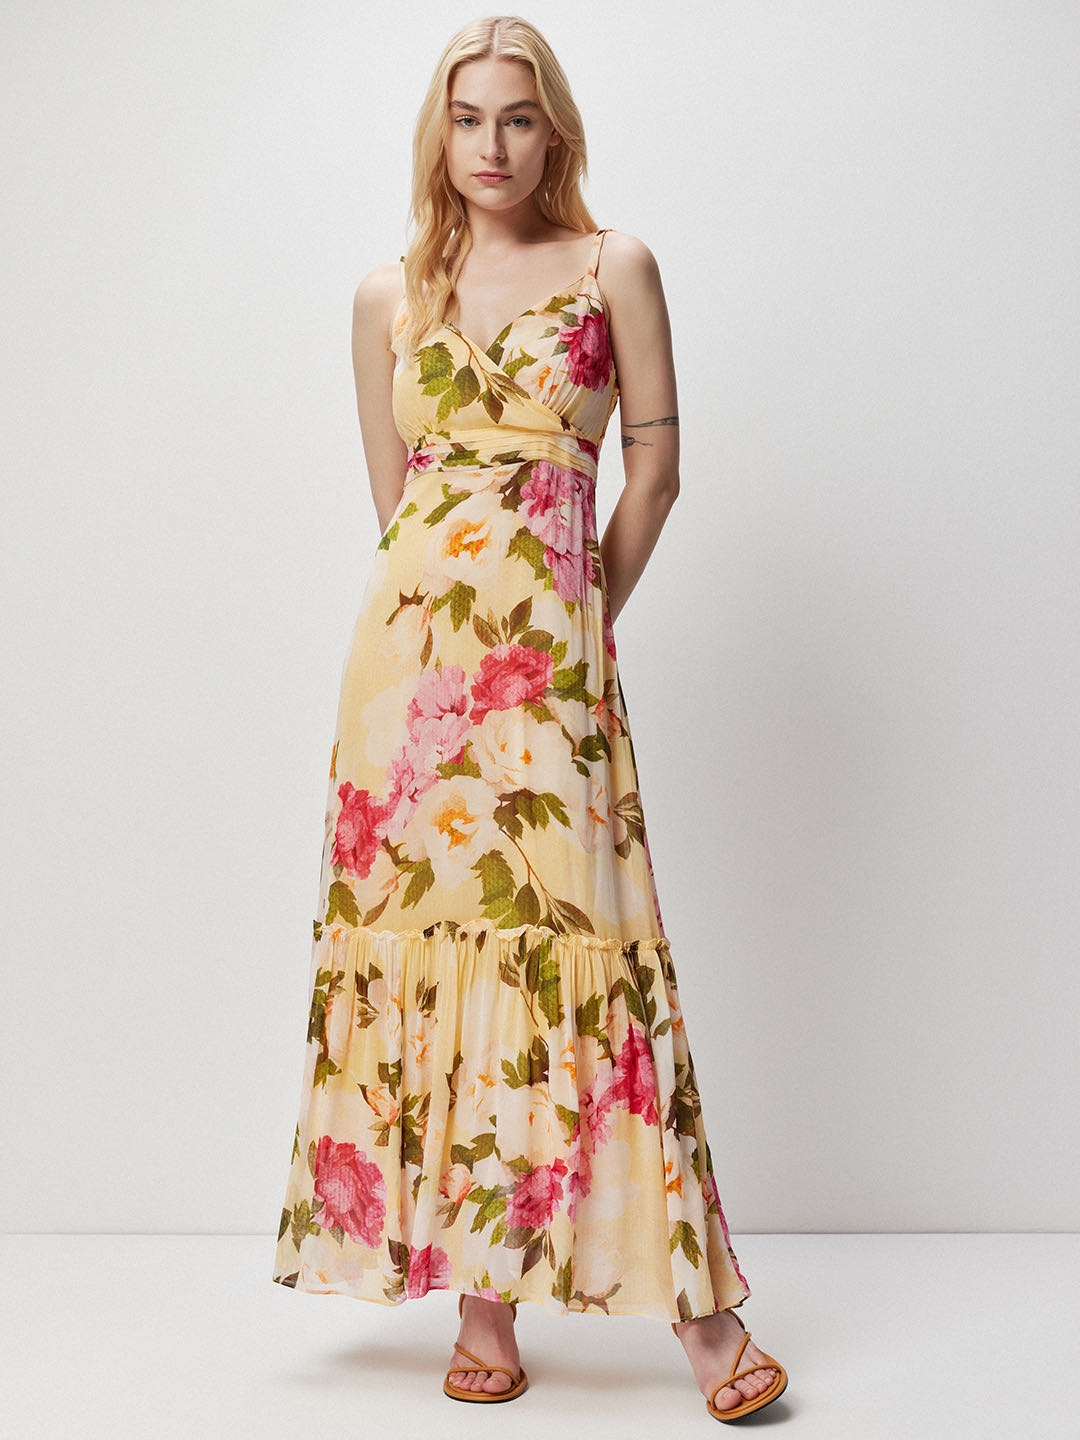 Balloon Sleeves Floral Printed Tie Up Fit & Flare Maxi Dress | EST-VT-112 |  Cilory.com